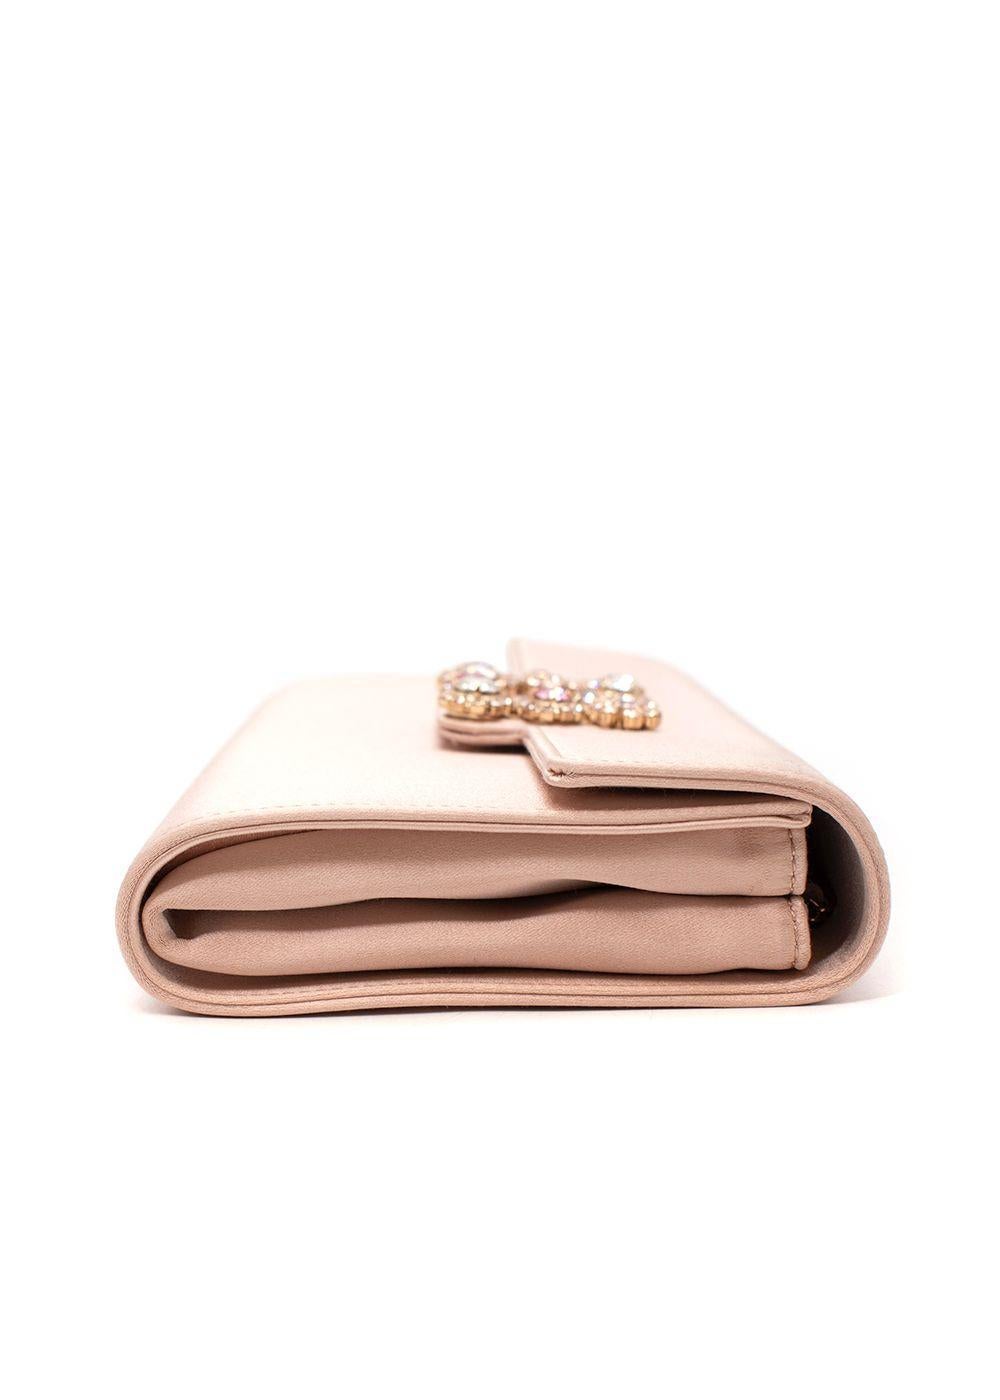 Roger Vivier Nude-Pink Satin Flower Strass Chain Clutch In New Condition For Sale In London, GB